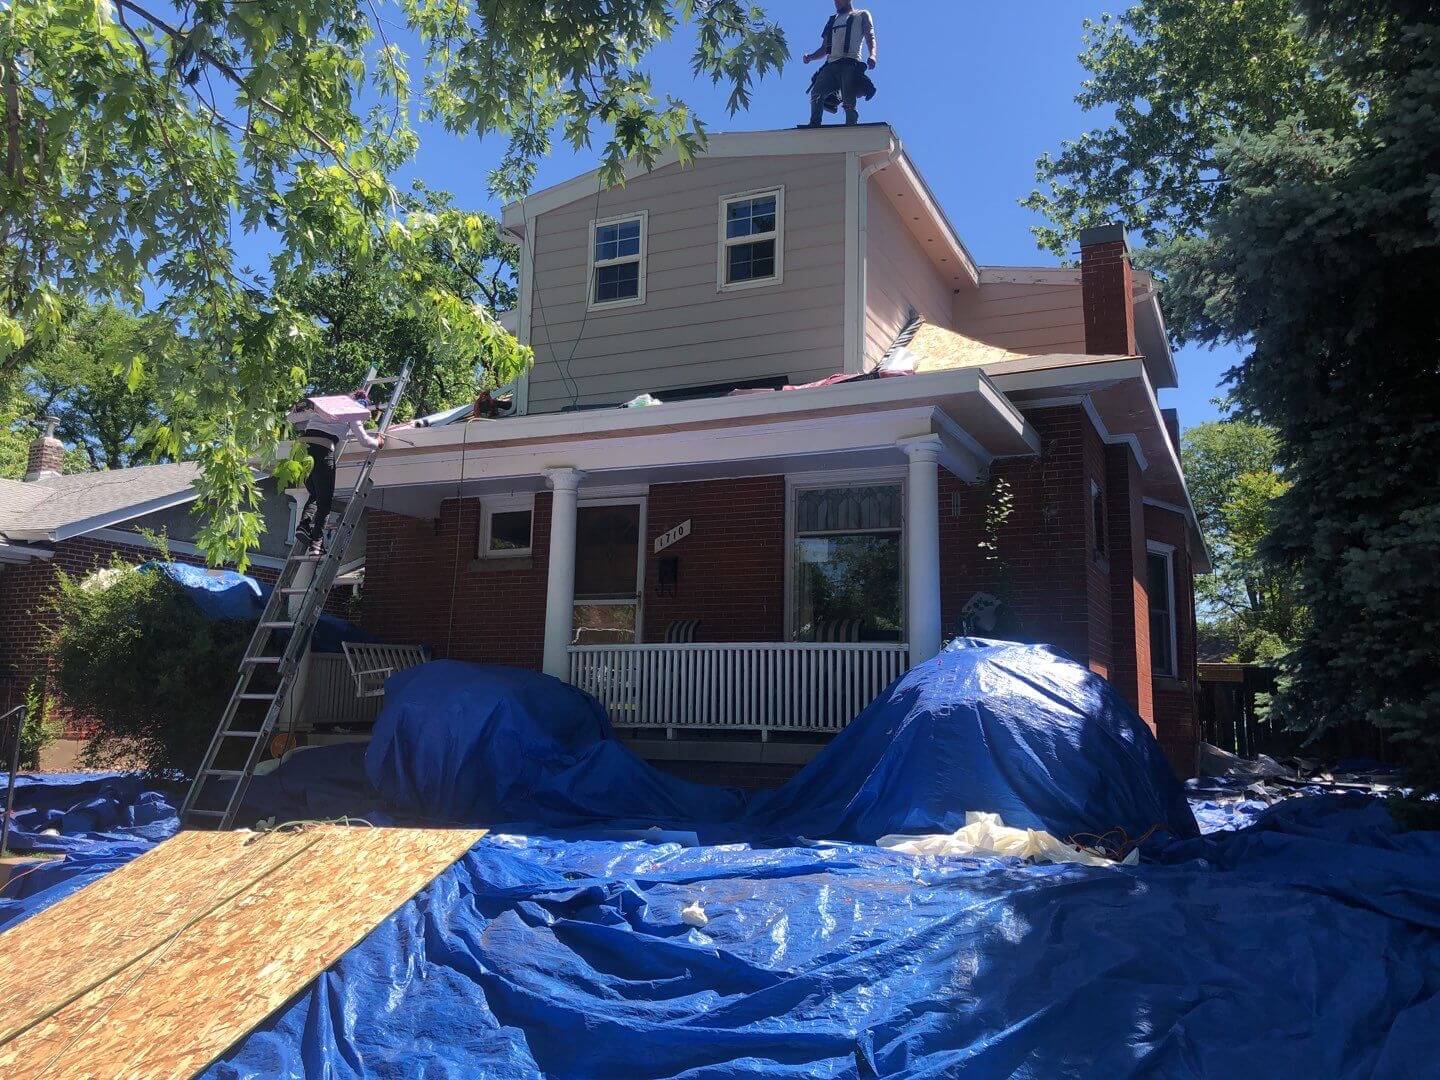 Roofing Contractor at work in Denver